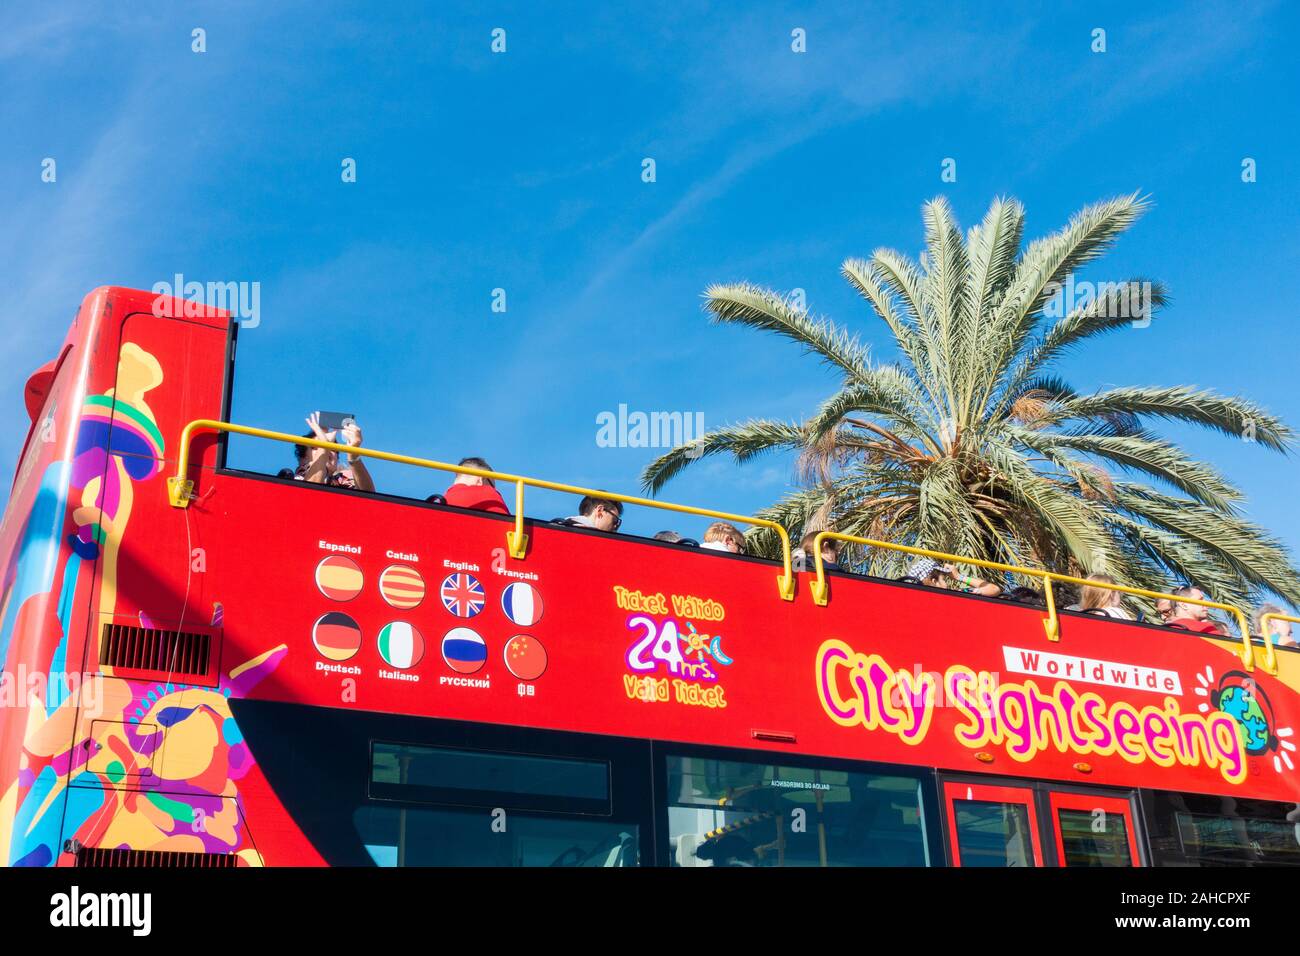 Gran Canaria, Canary Islands, Spain. 28th December 2019. Weather: Cruise  ship passengers on city sightseeing bus in Las Palmas on Gran Canaria as  five cruise ships, carrying more than 10.000 passengers, many